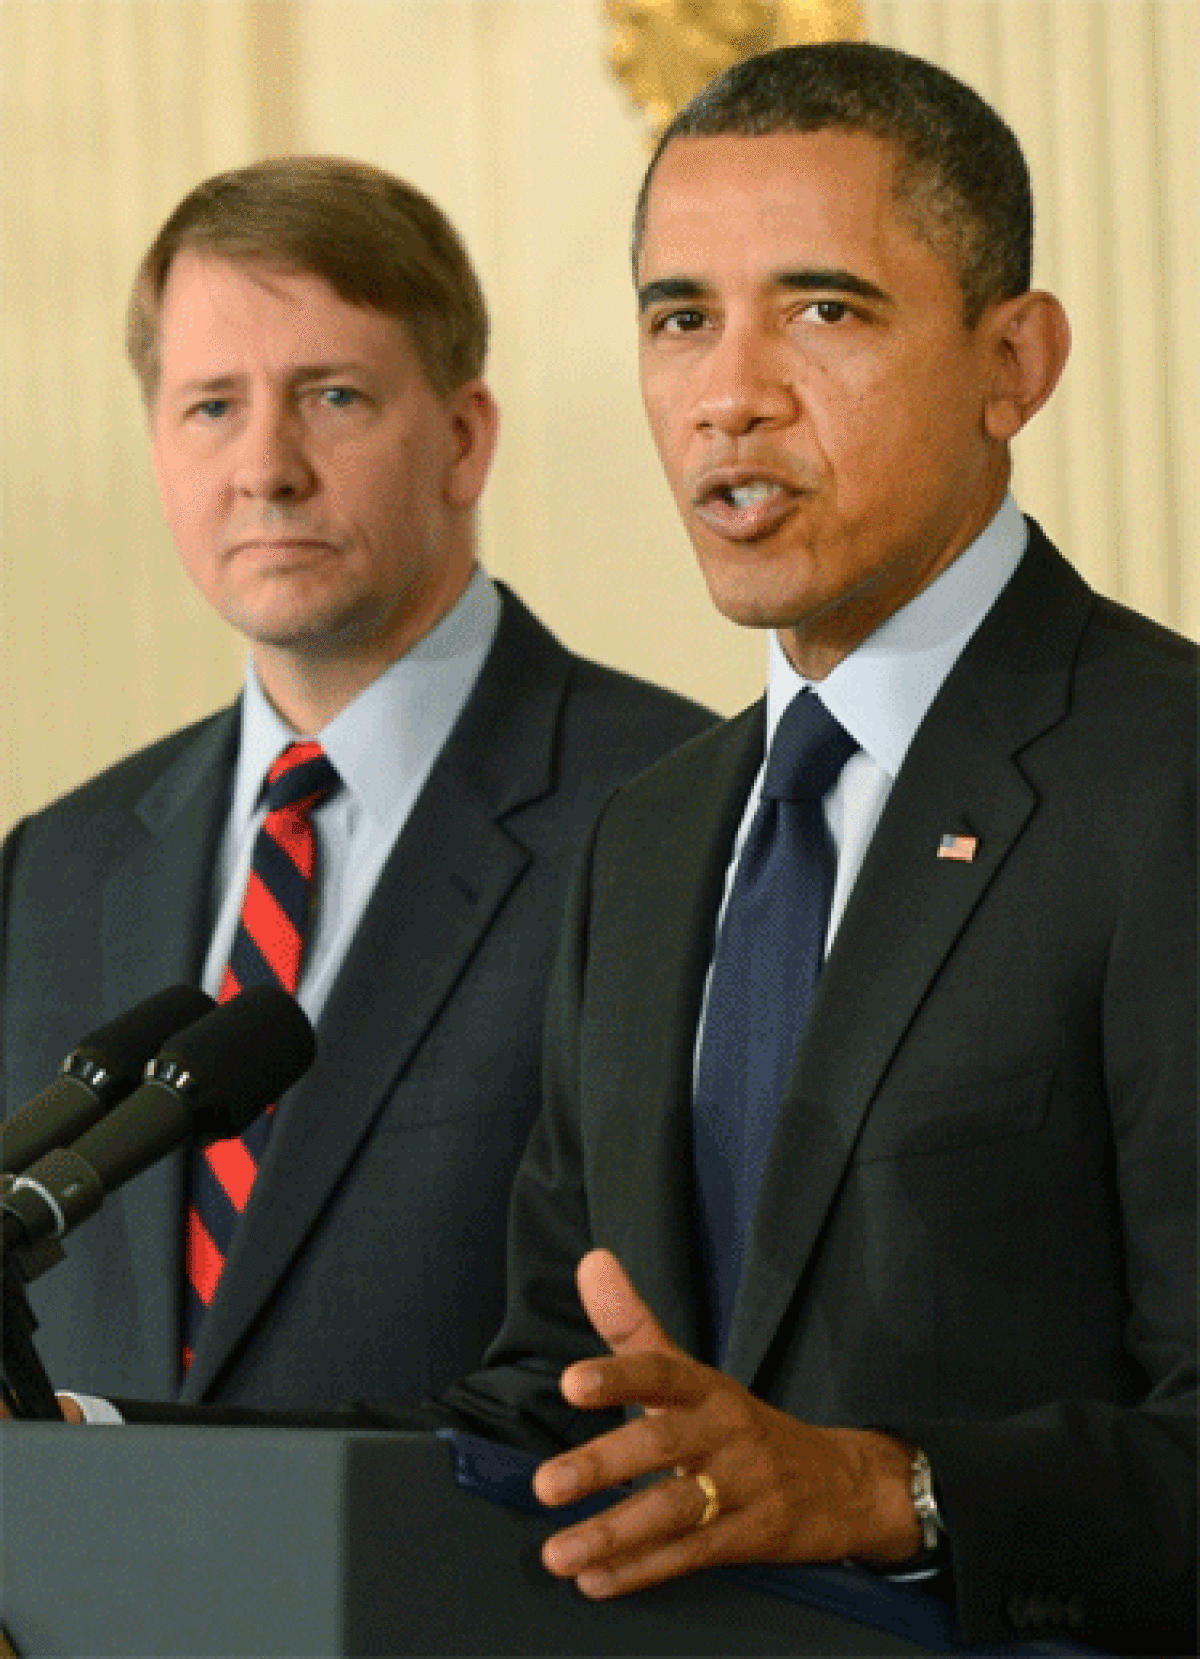 President Obama introduces Richard Cordray, left, as his re-nominee to stay as the Director of the United States Consumer Financial Protection Bureau.